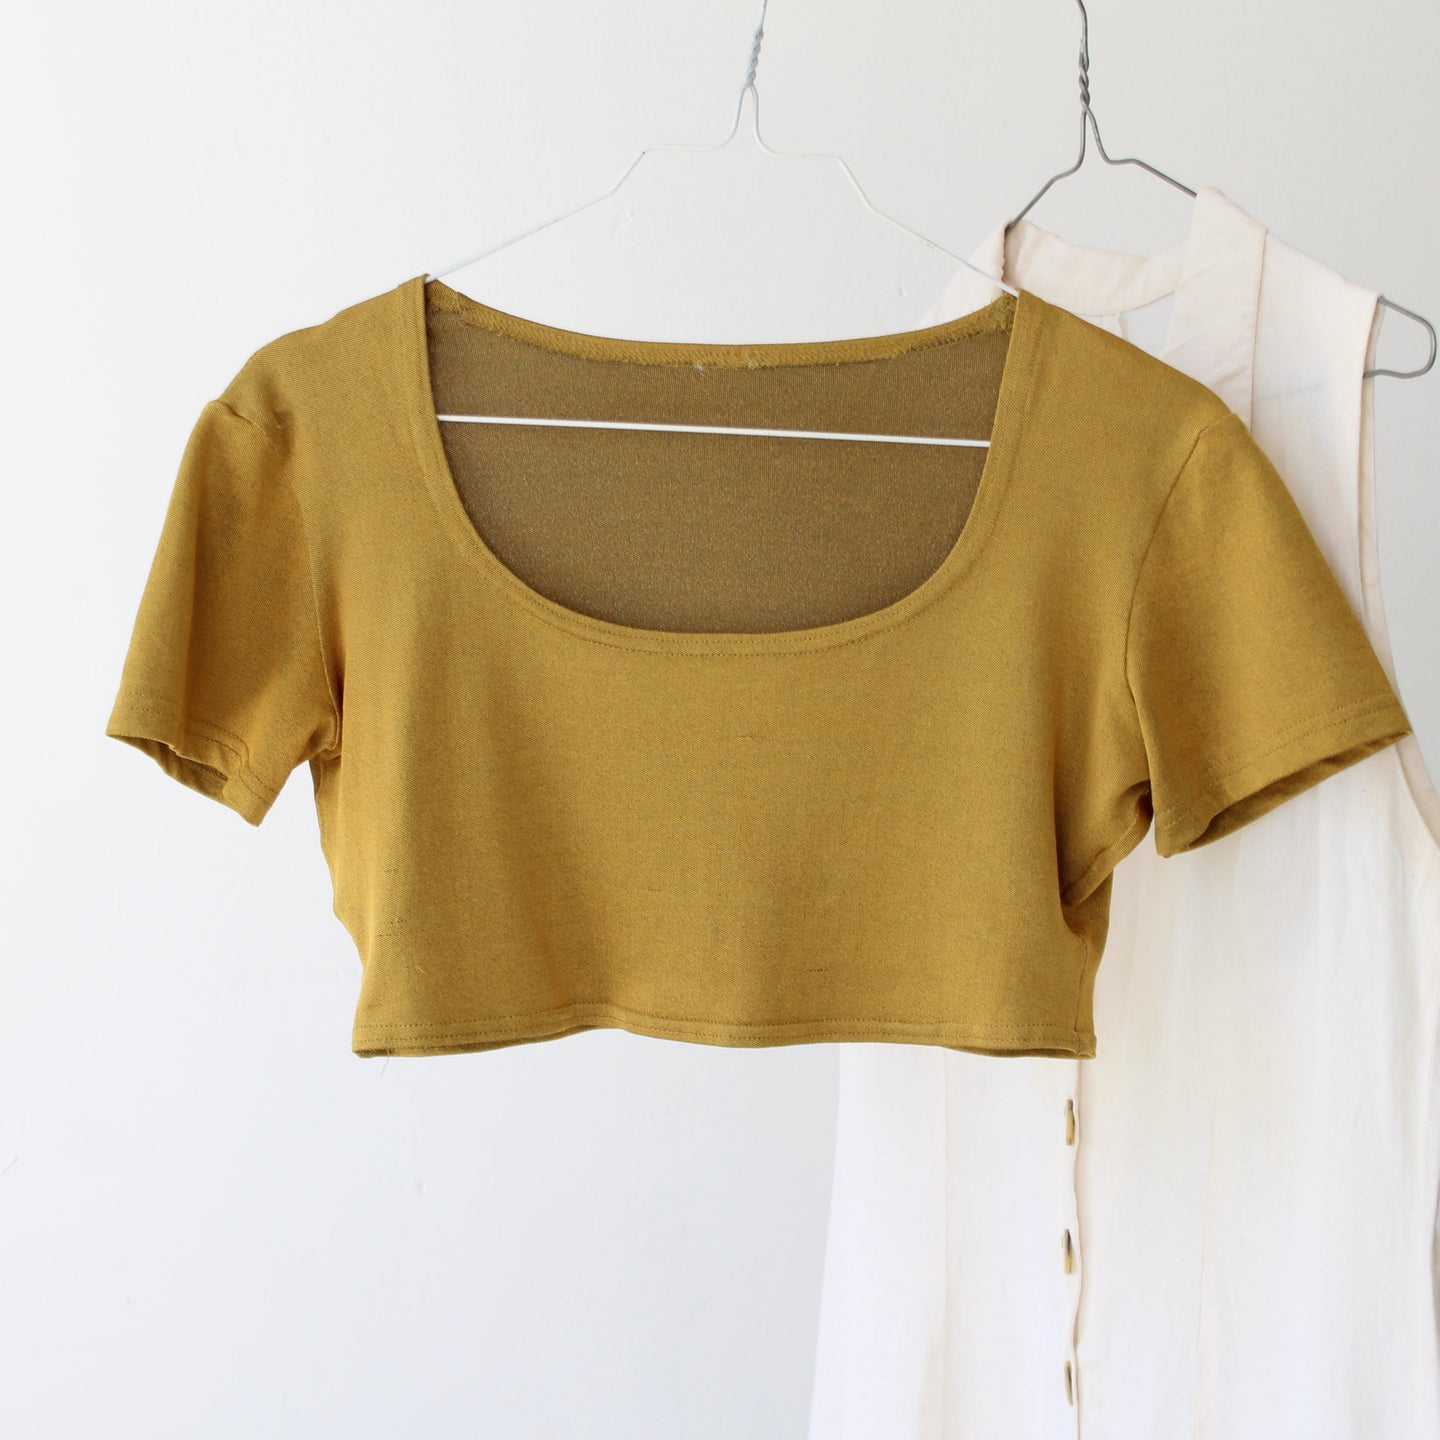 00's cropped top, size XS